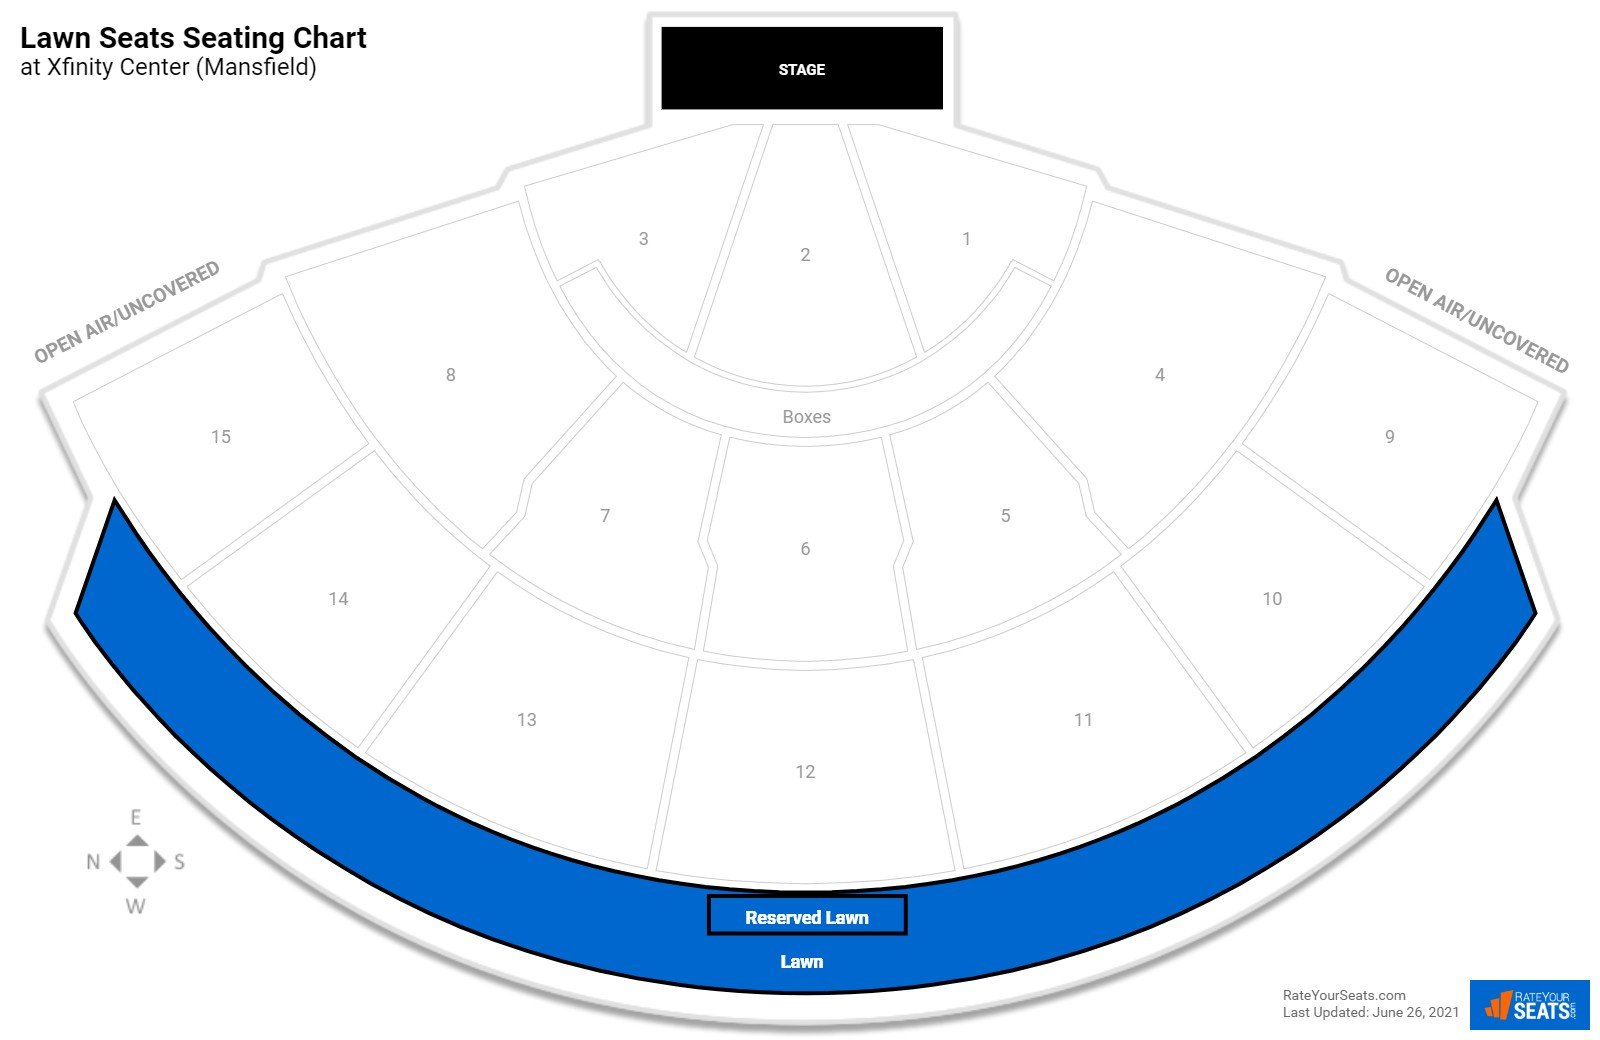 Concert Lawn Seats Seating Chart at Xfinity Center (Mansfield)